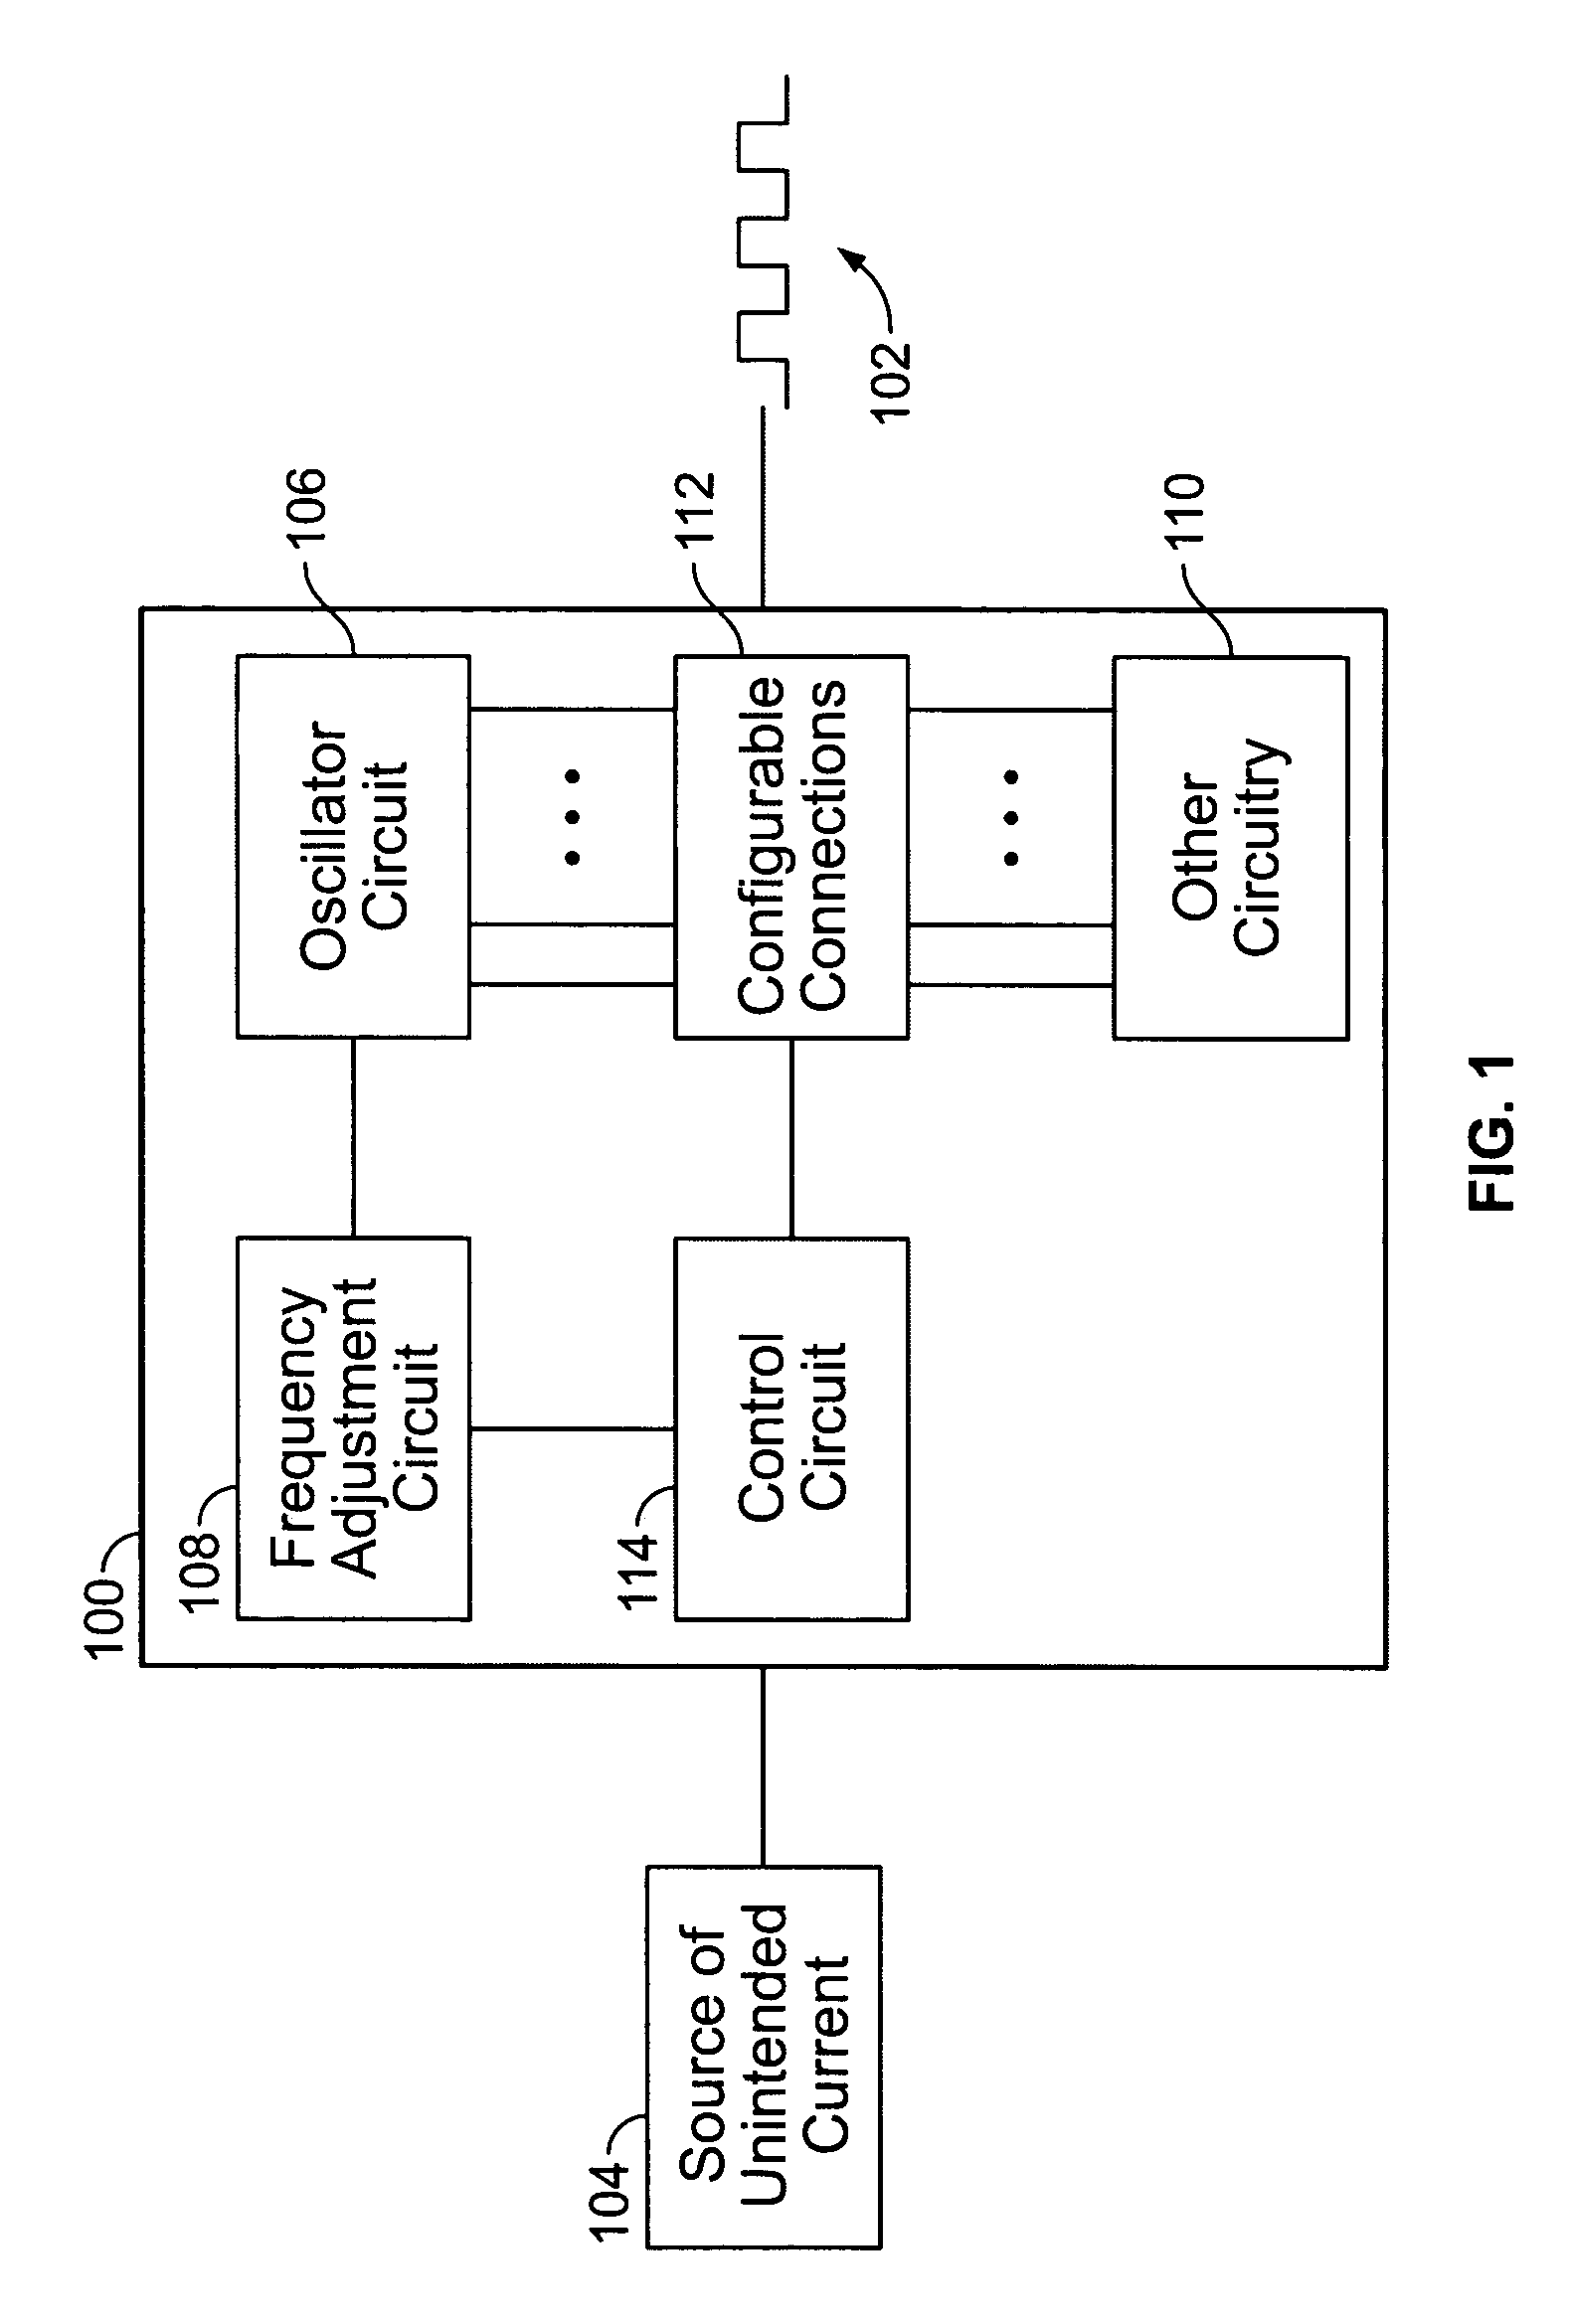 Systems and methods for mitigating phase jitter in a periodic signal